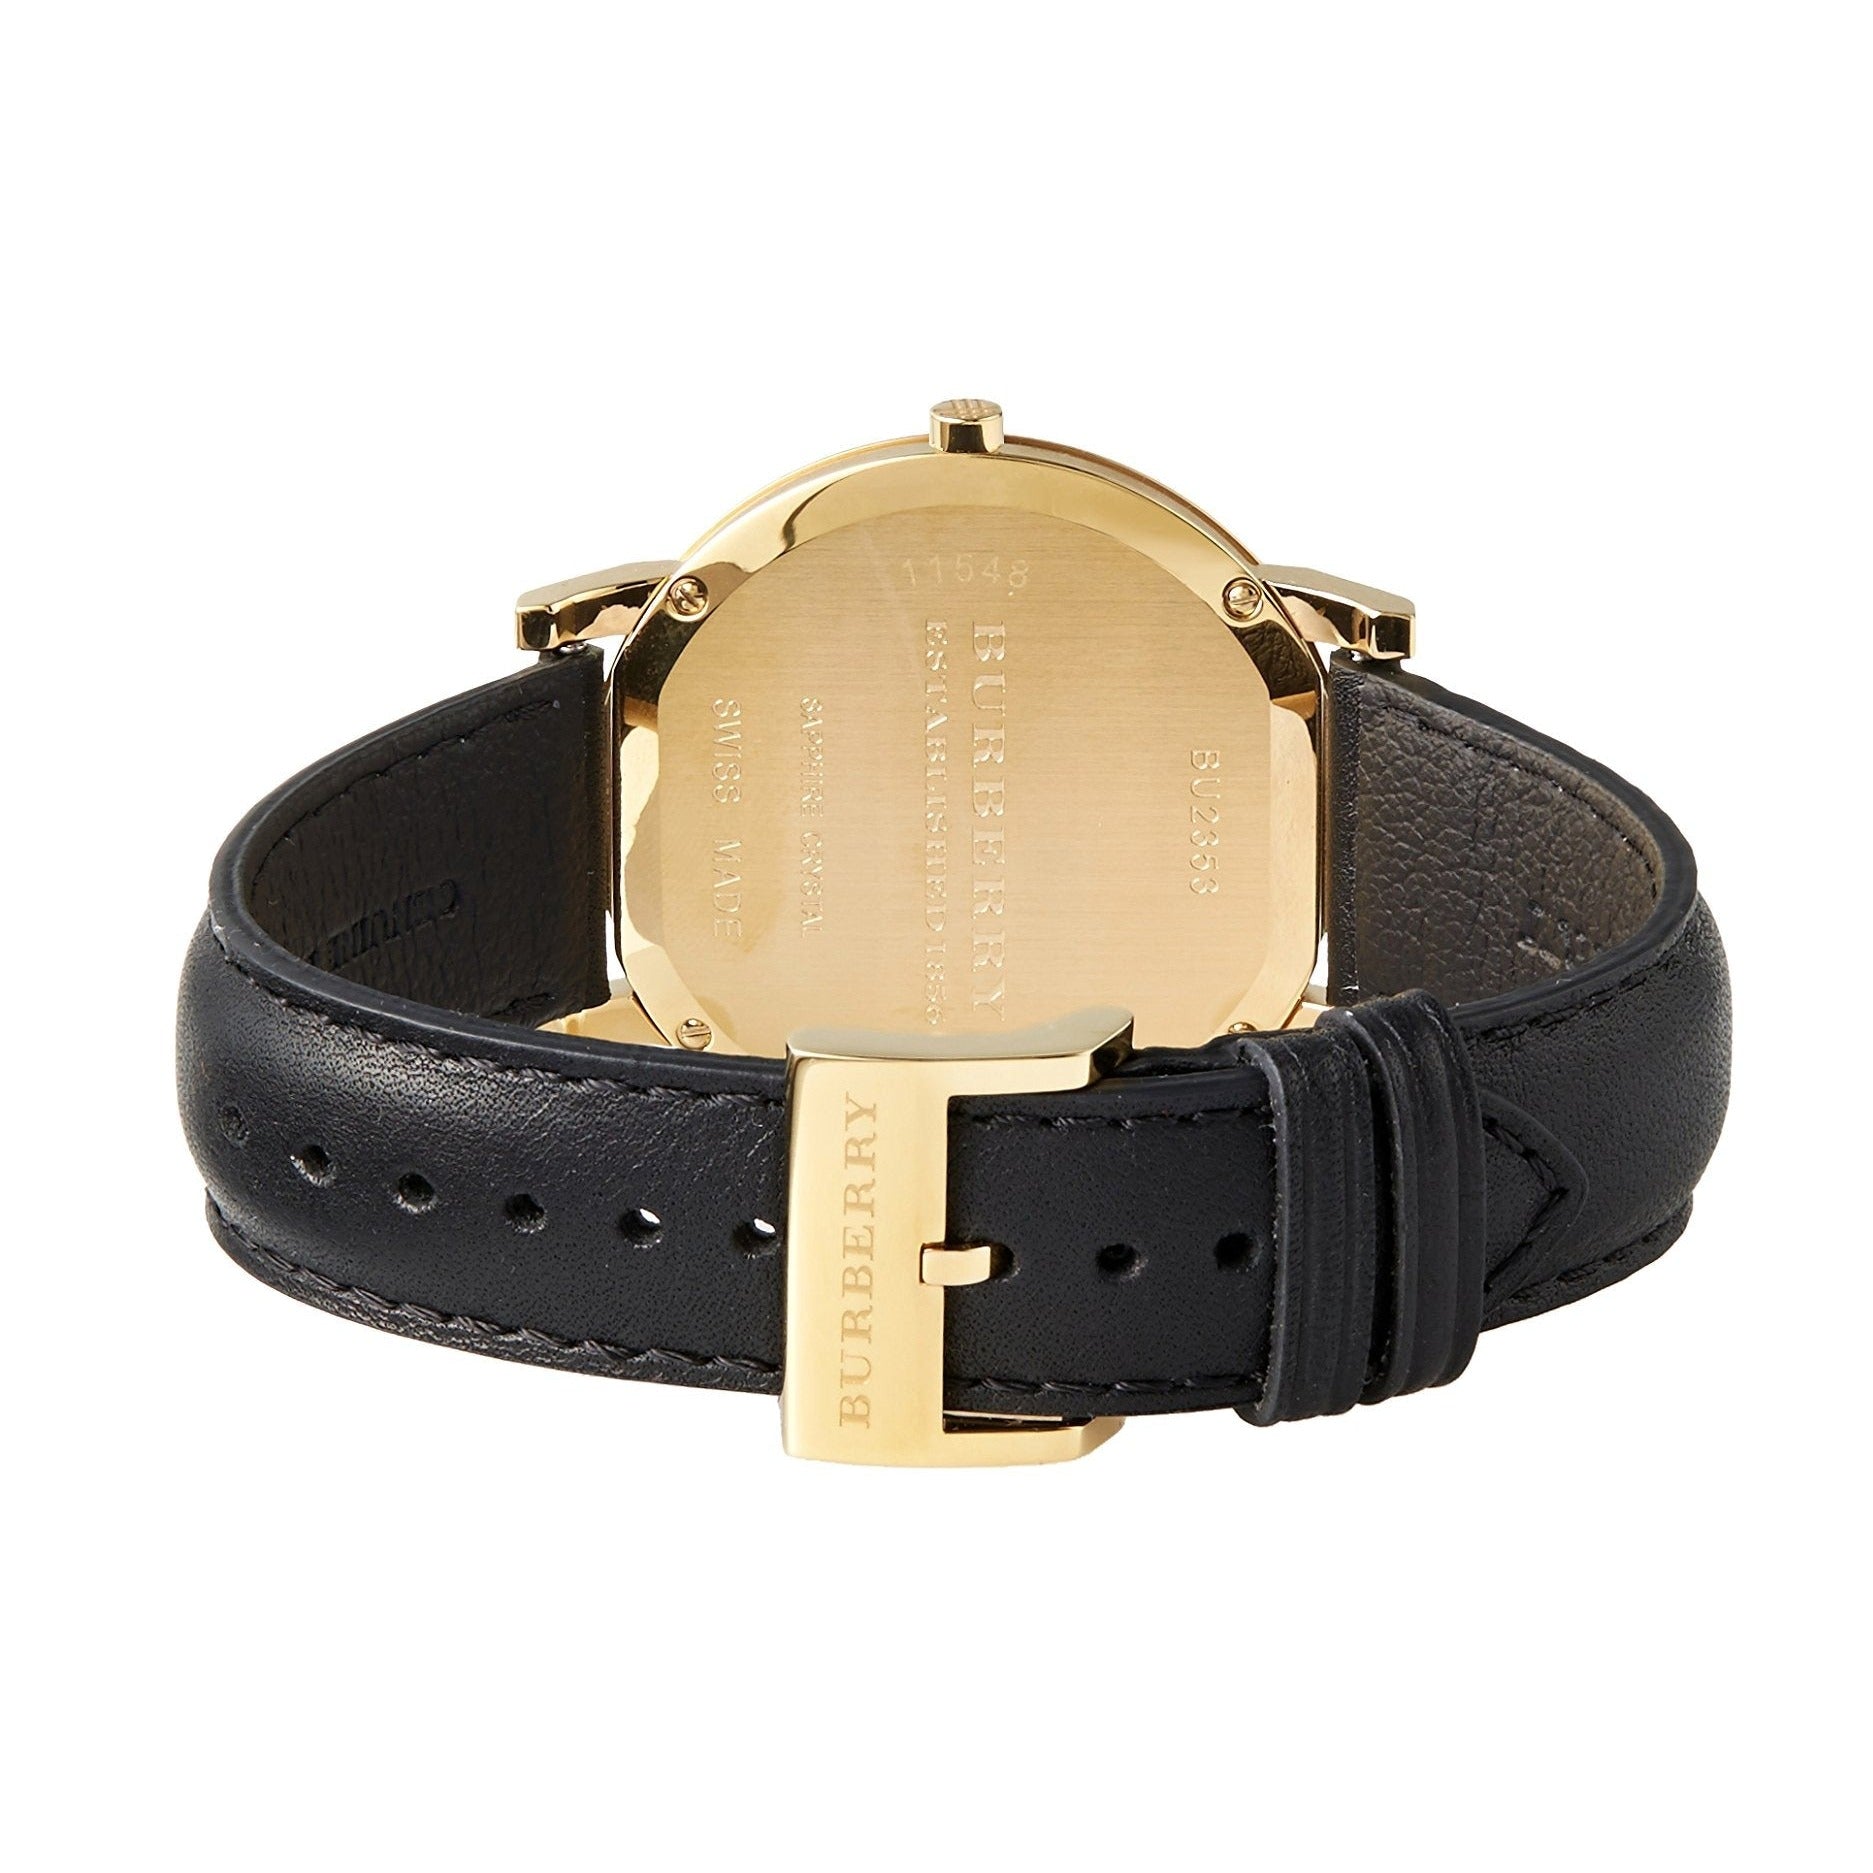 Burberry Heritage Gold Dial Black Leather Strap Watch for Men - BU2353